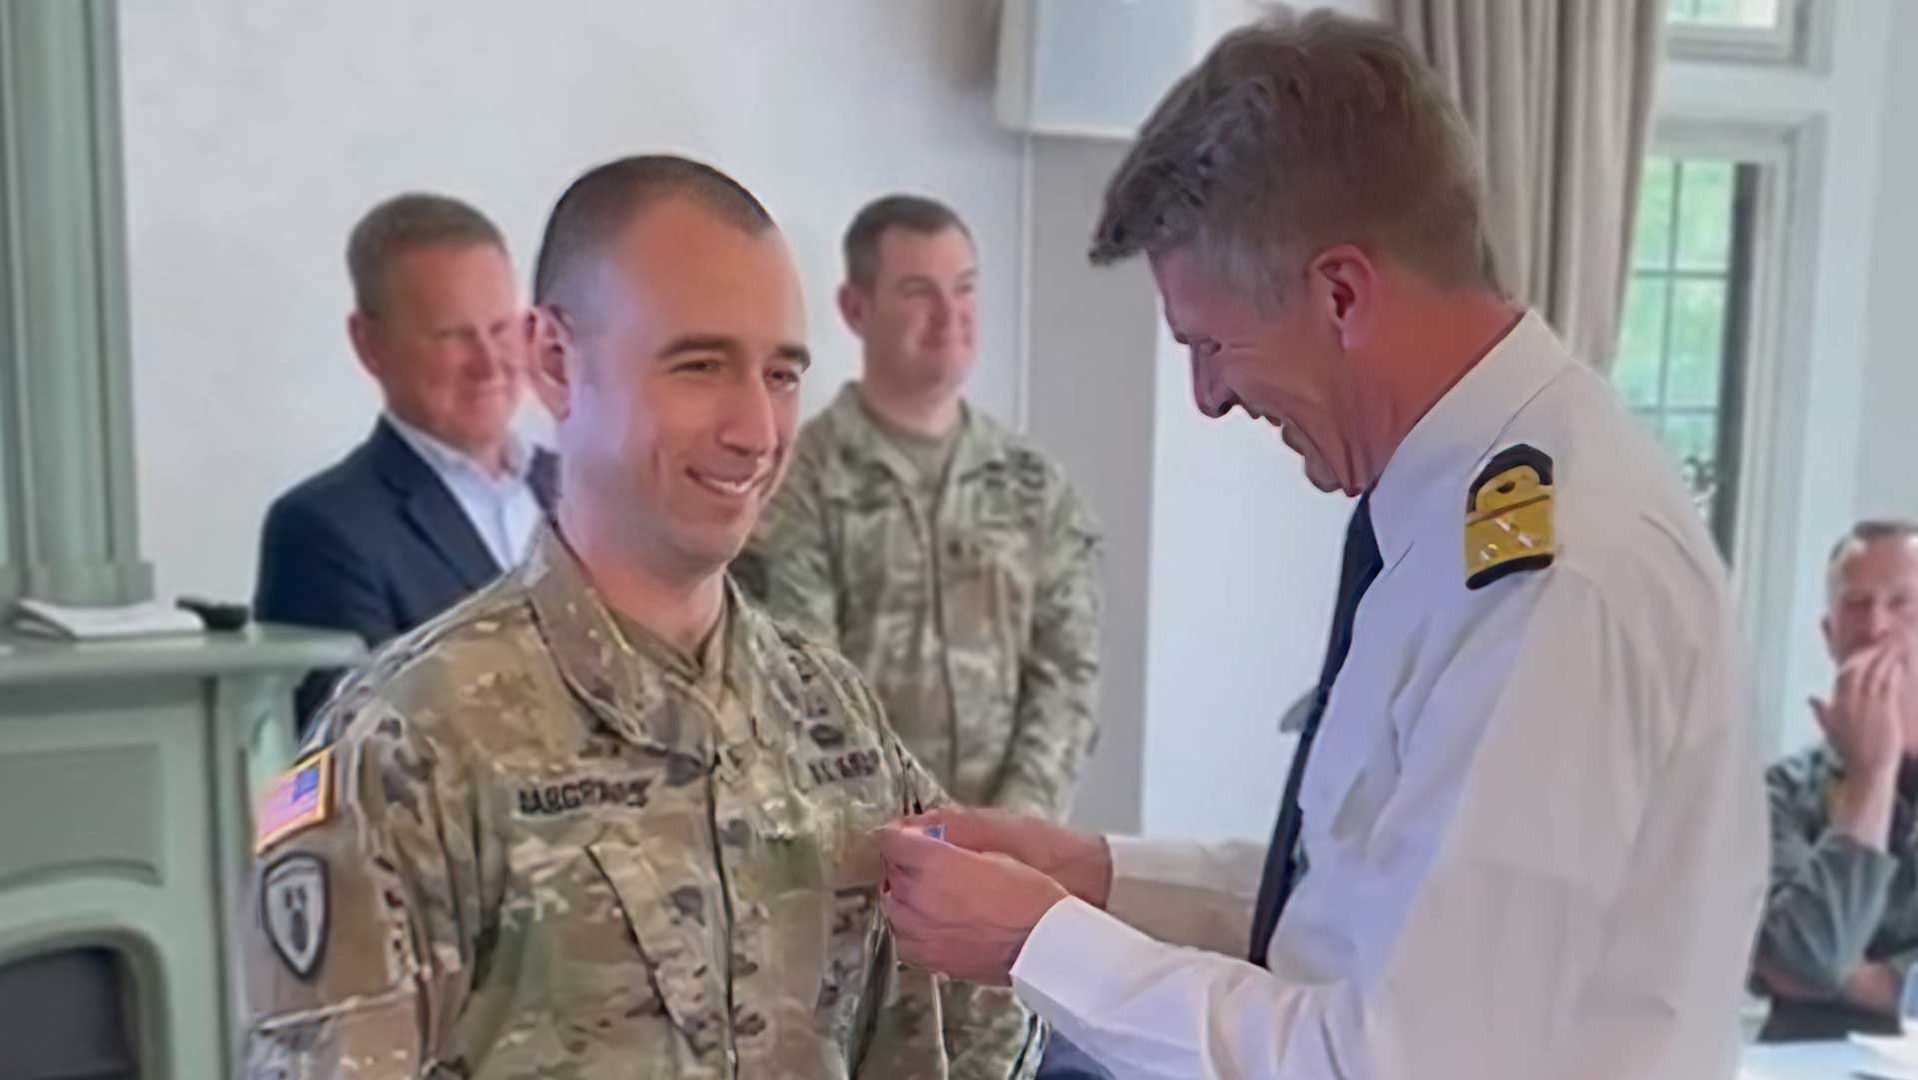 U.S. Army Major Drew Hargraves, receives the Medal of Merit from Netherlands Vice Admiral Boudewijin.